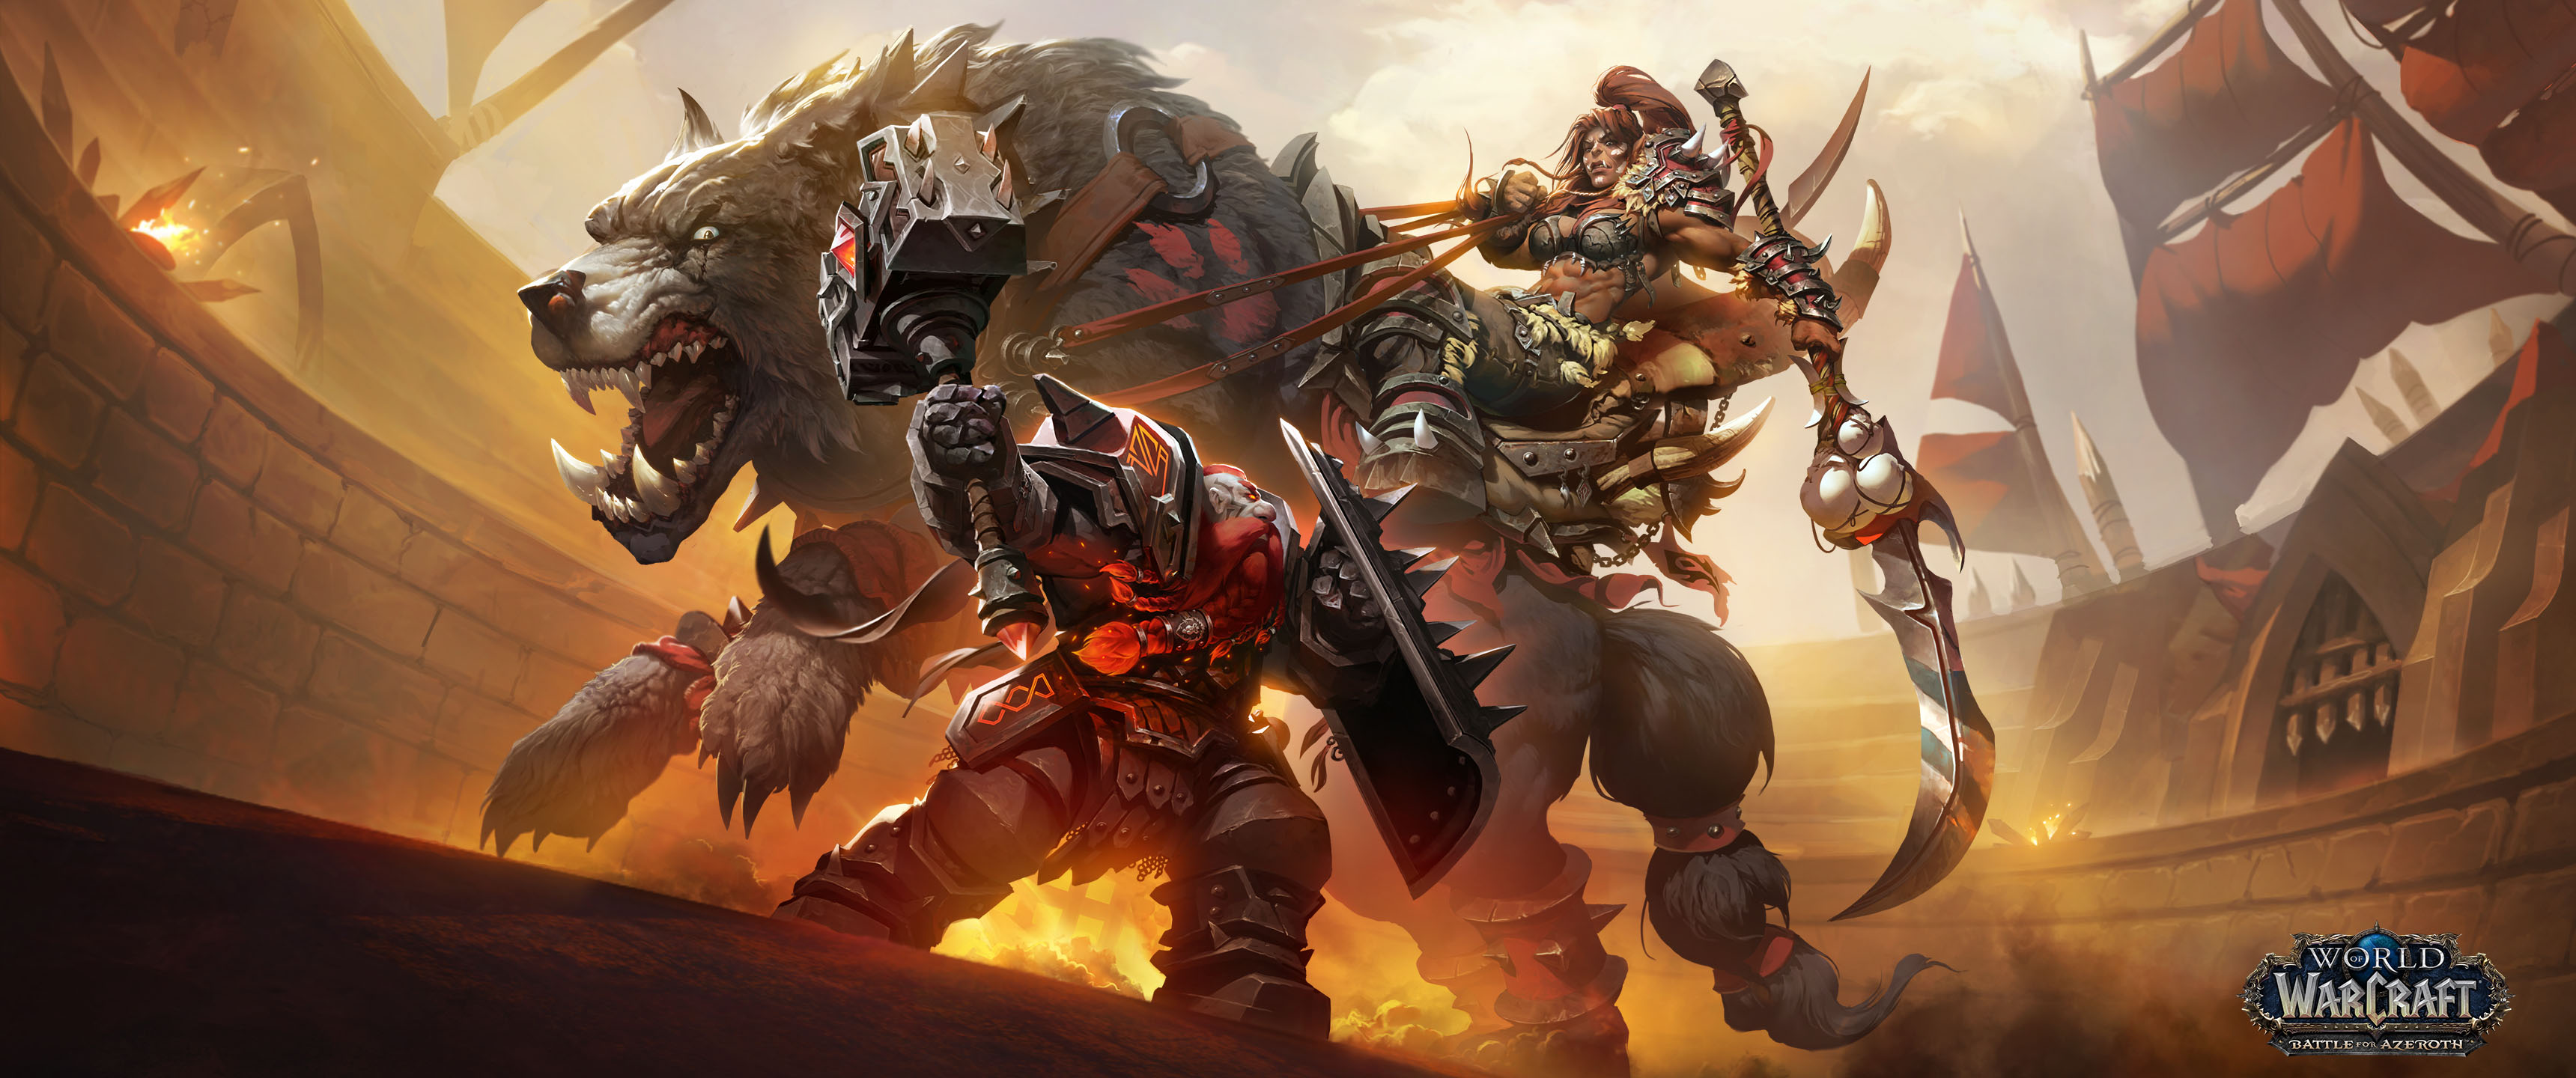 World Of Warcraft Battle For Azeroth 3440x1440